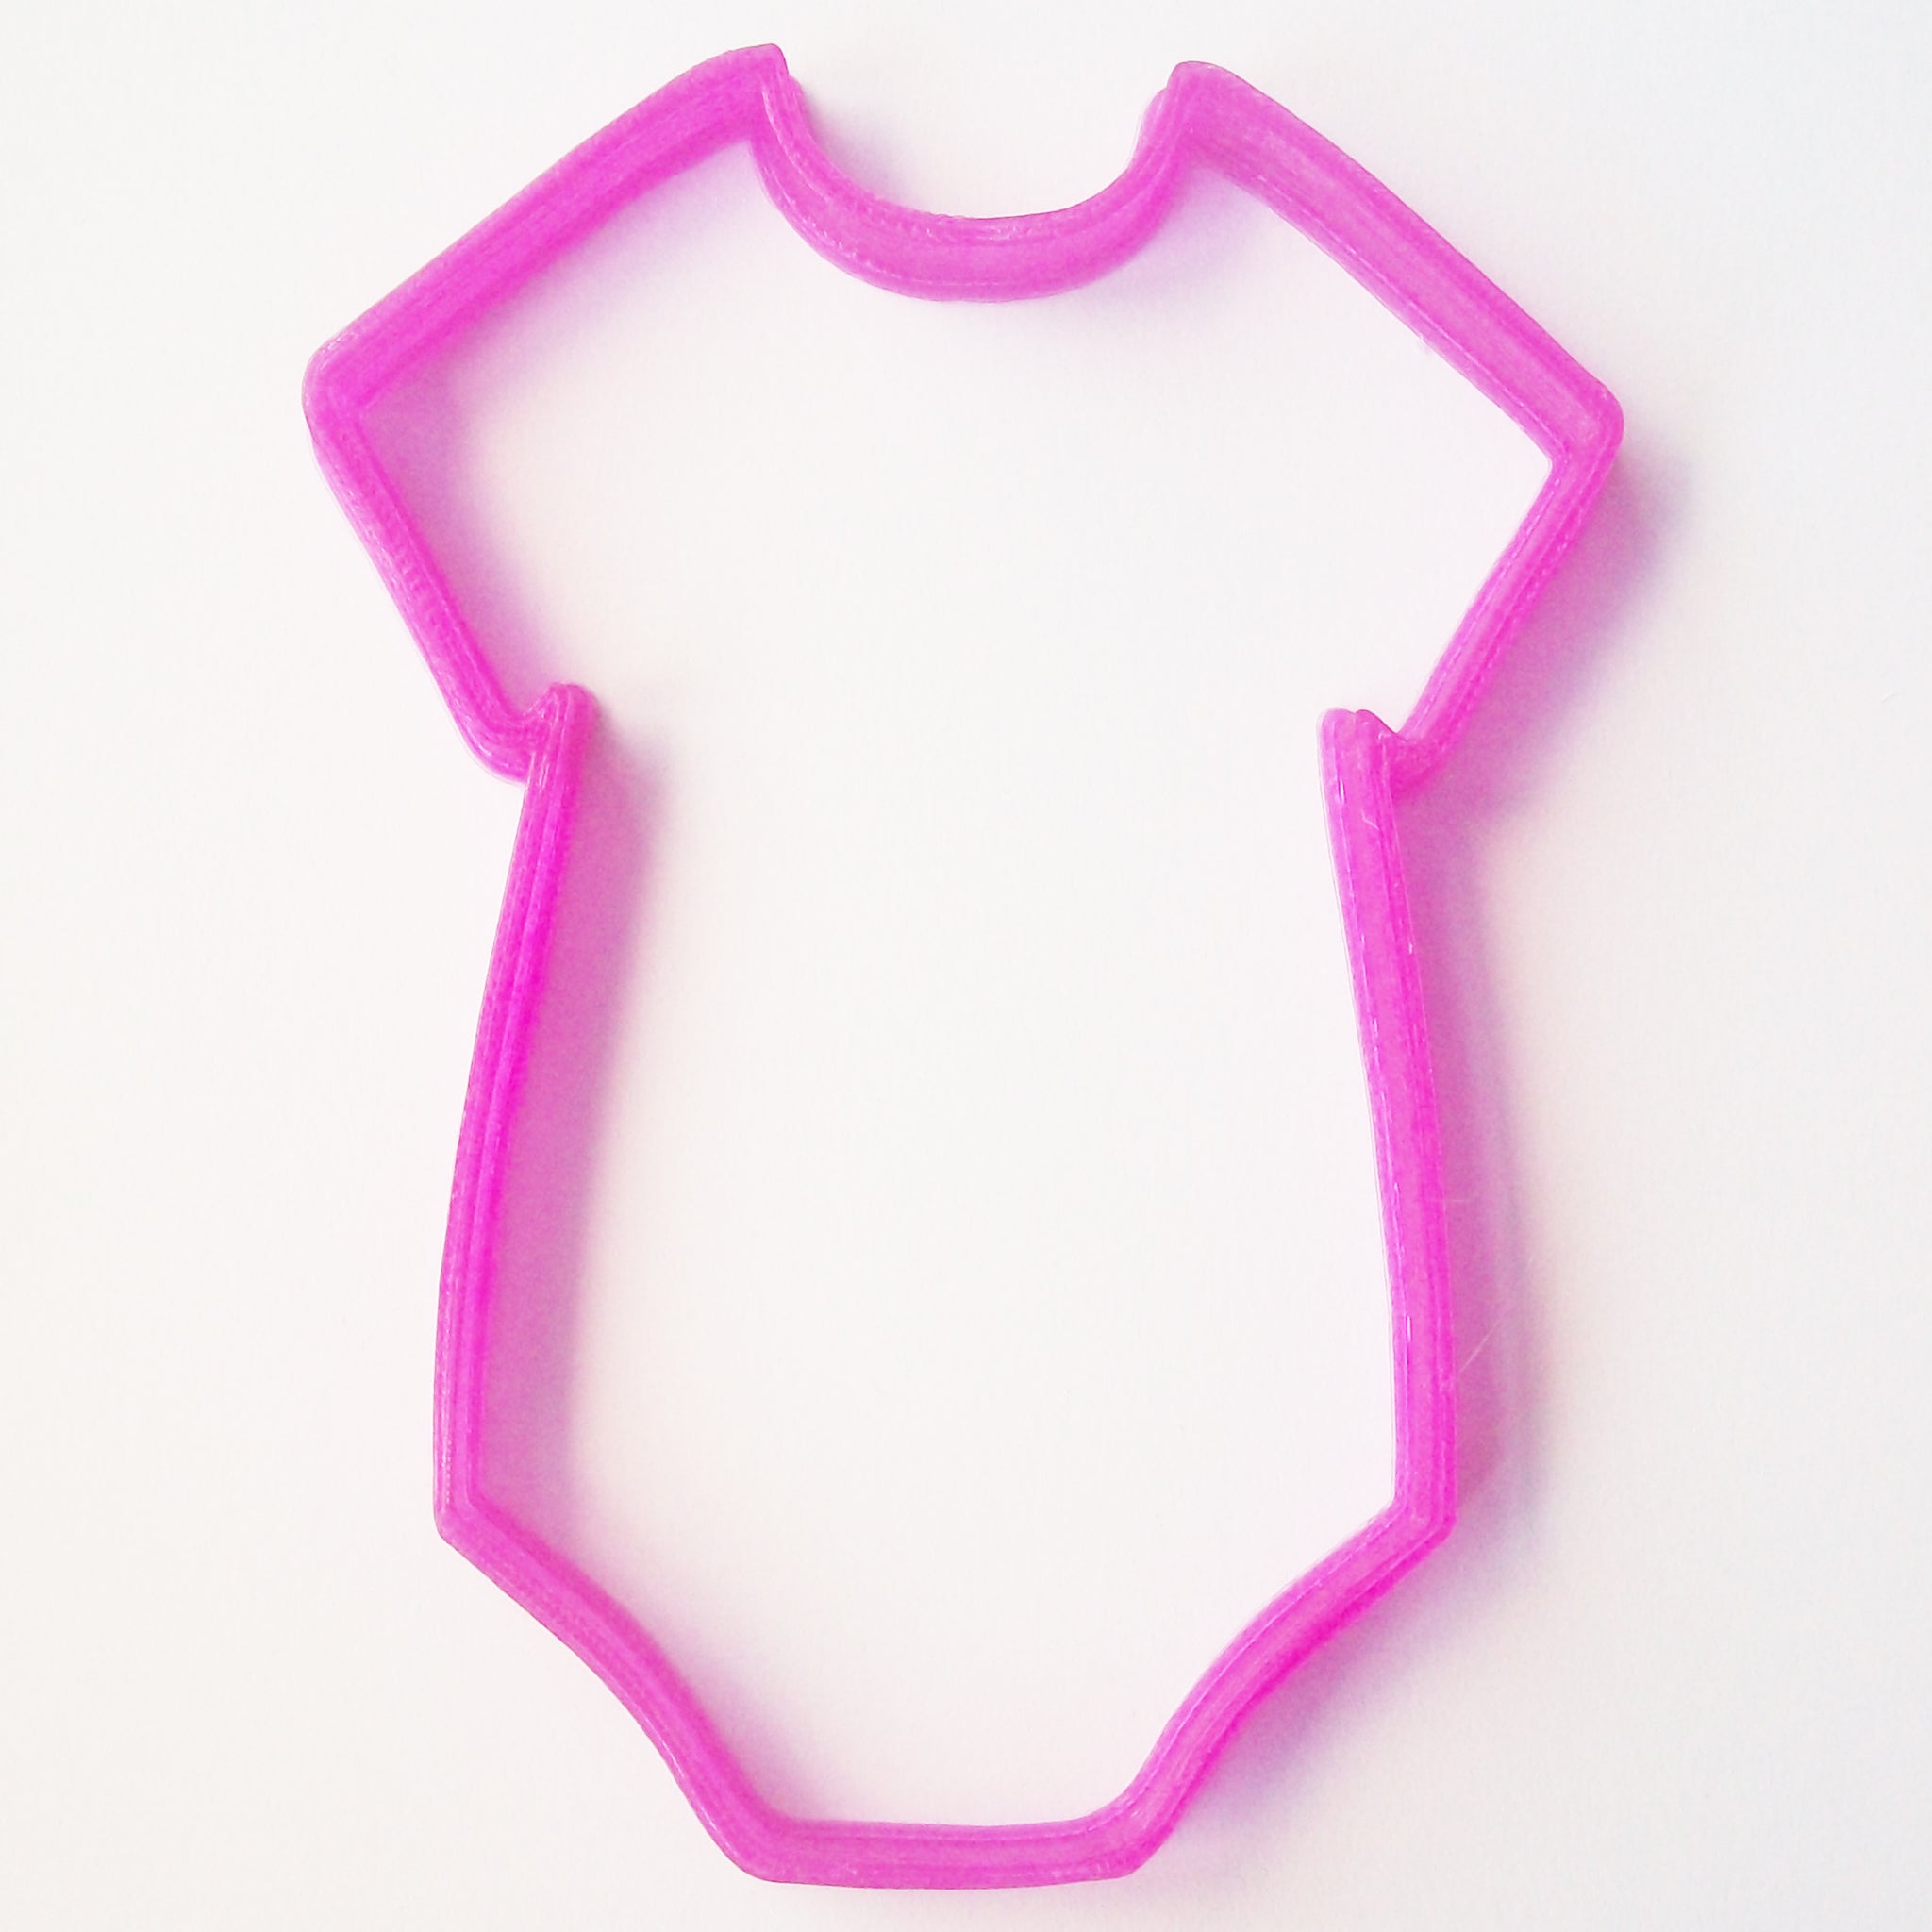 Baby Onesie Fondant - Cookie Cutter For Cake Decorating icing Fondant